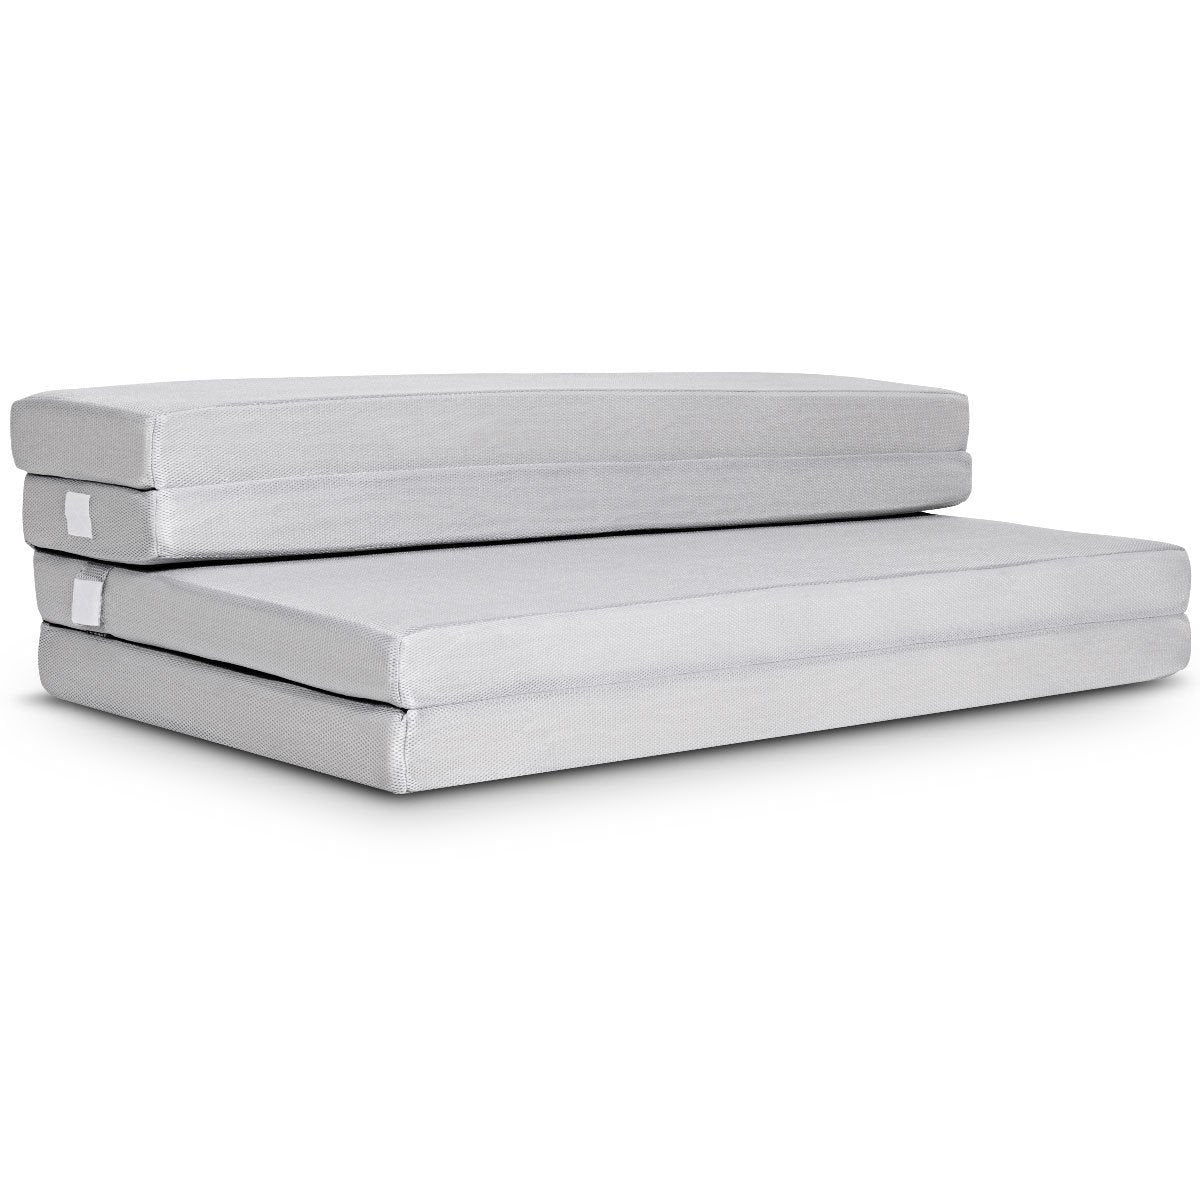 4 Inch Folding Sofa Bed Foam Mattress with Handles-Queen Size, Gray